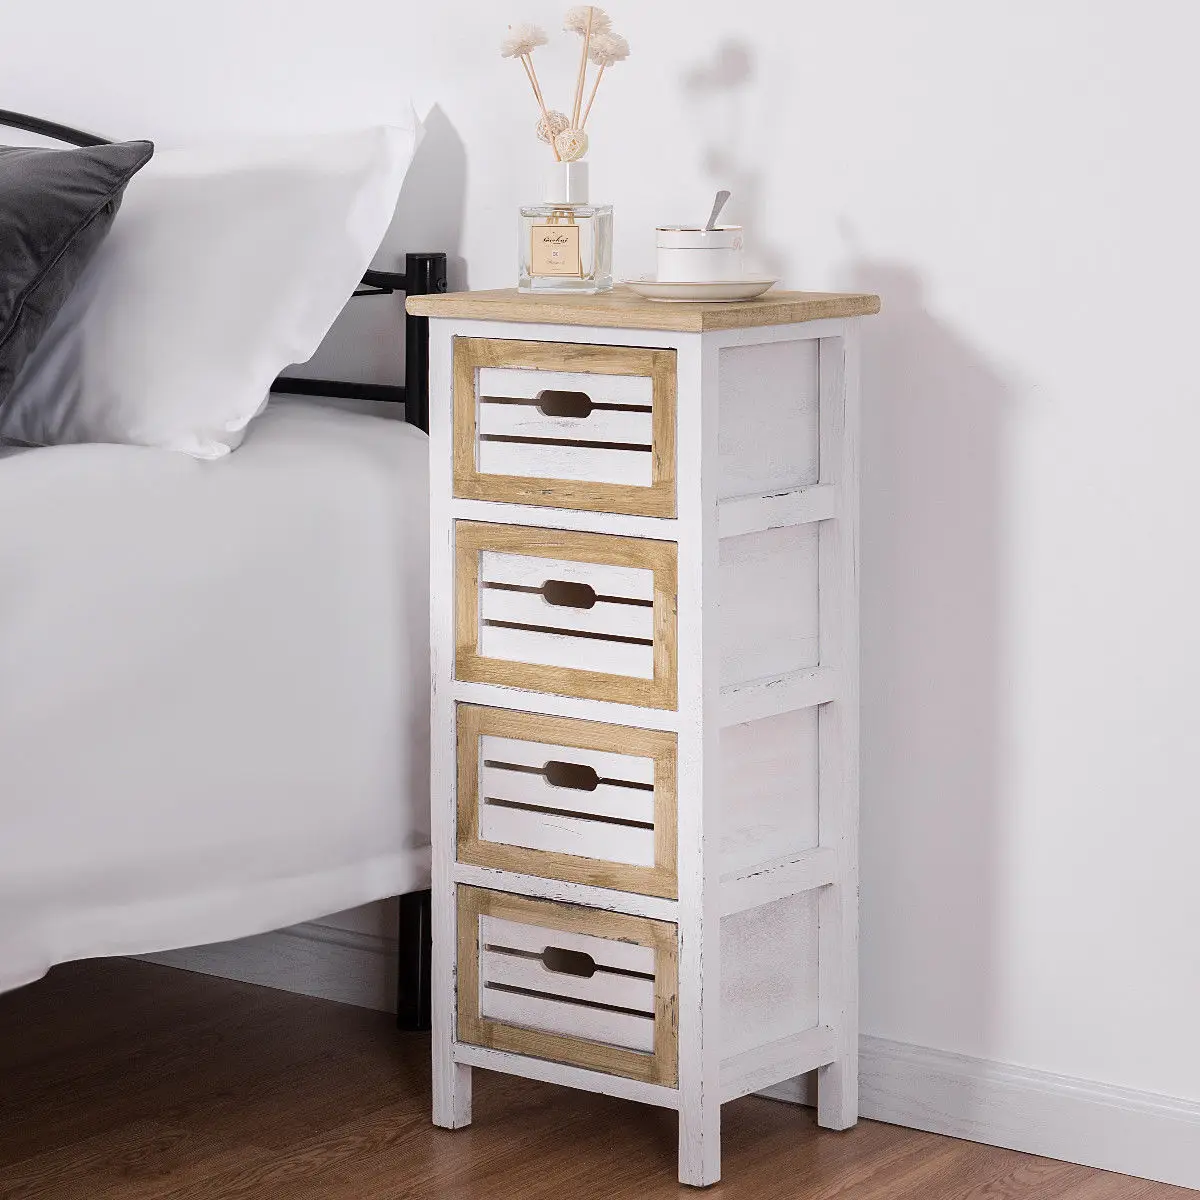 Tier 1 Bedside Tables White Bedside Table Cabinet Bed Sides Table Bedroom Funiture Night Stand Storage Small Modern Cabinet Plastic with door